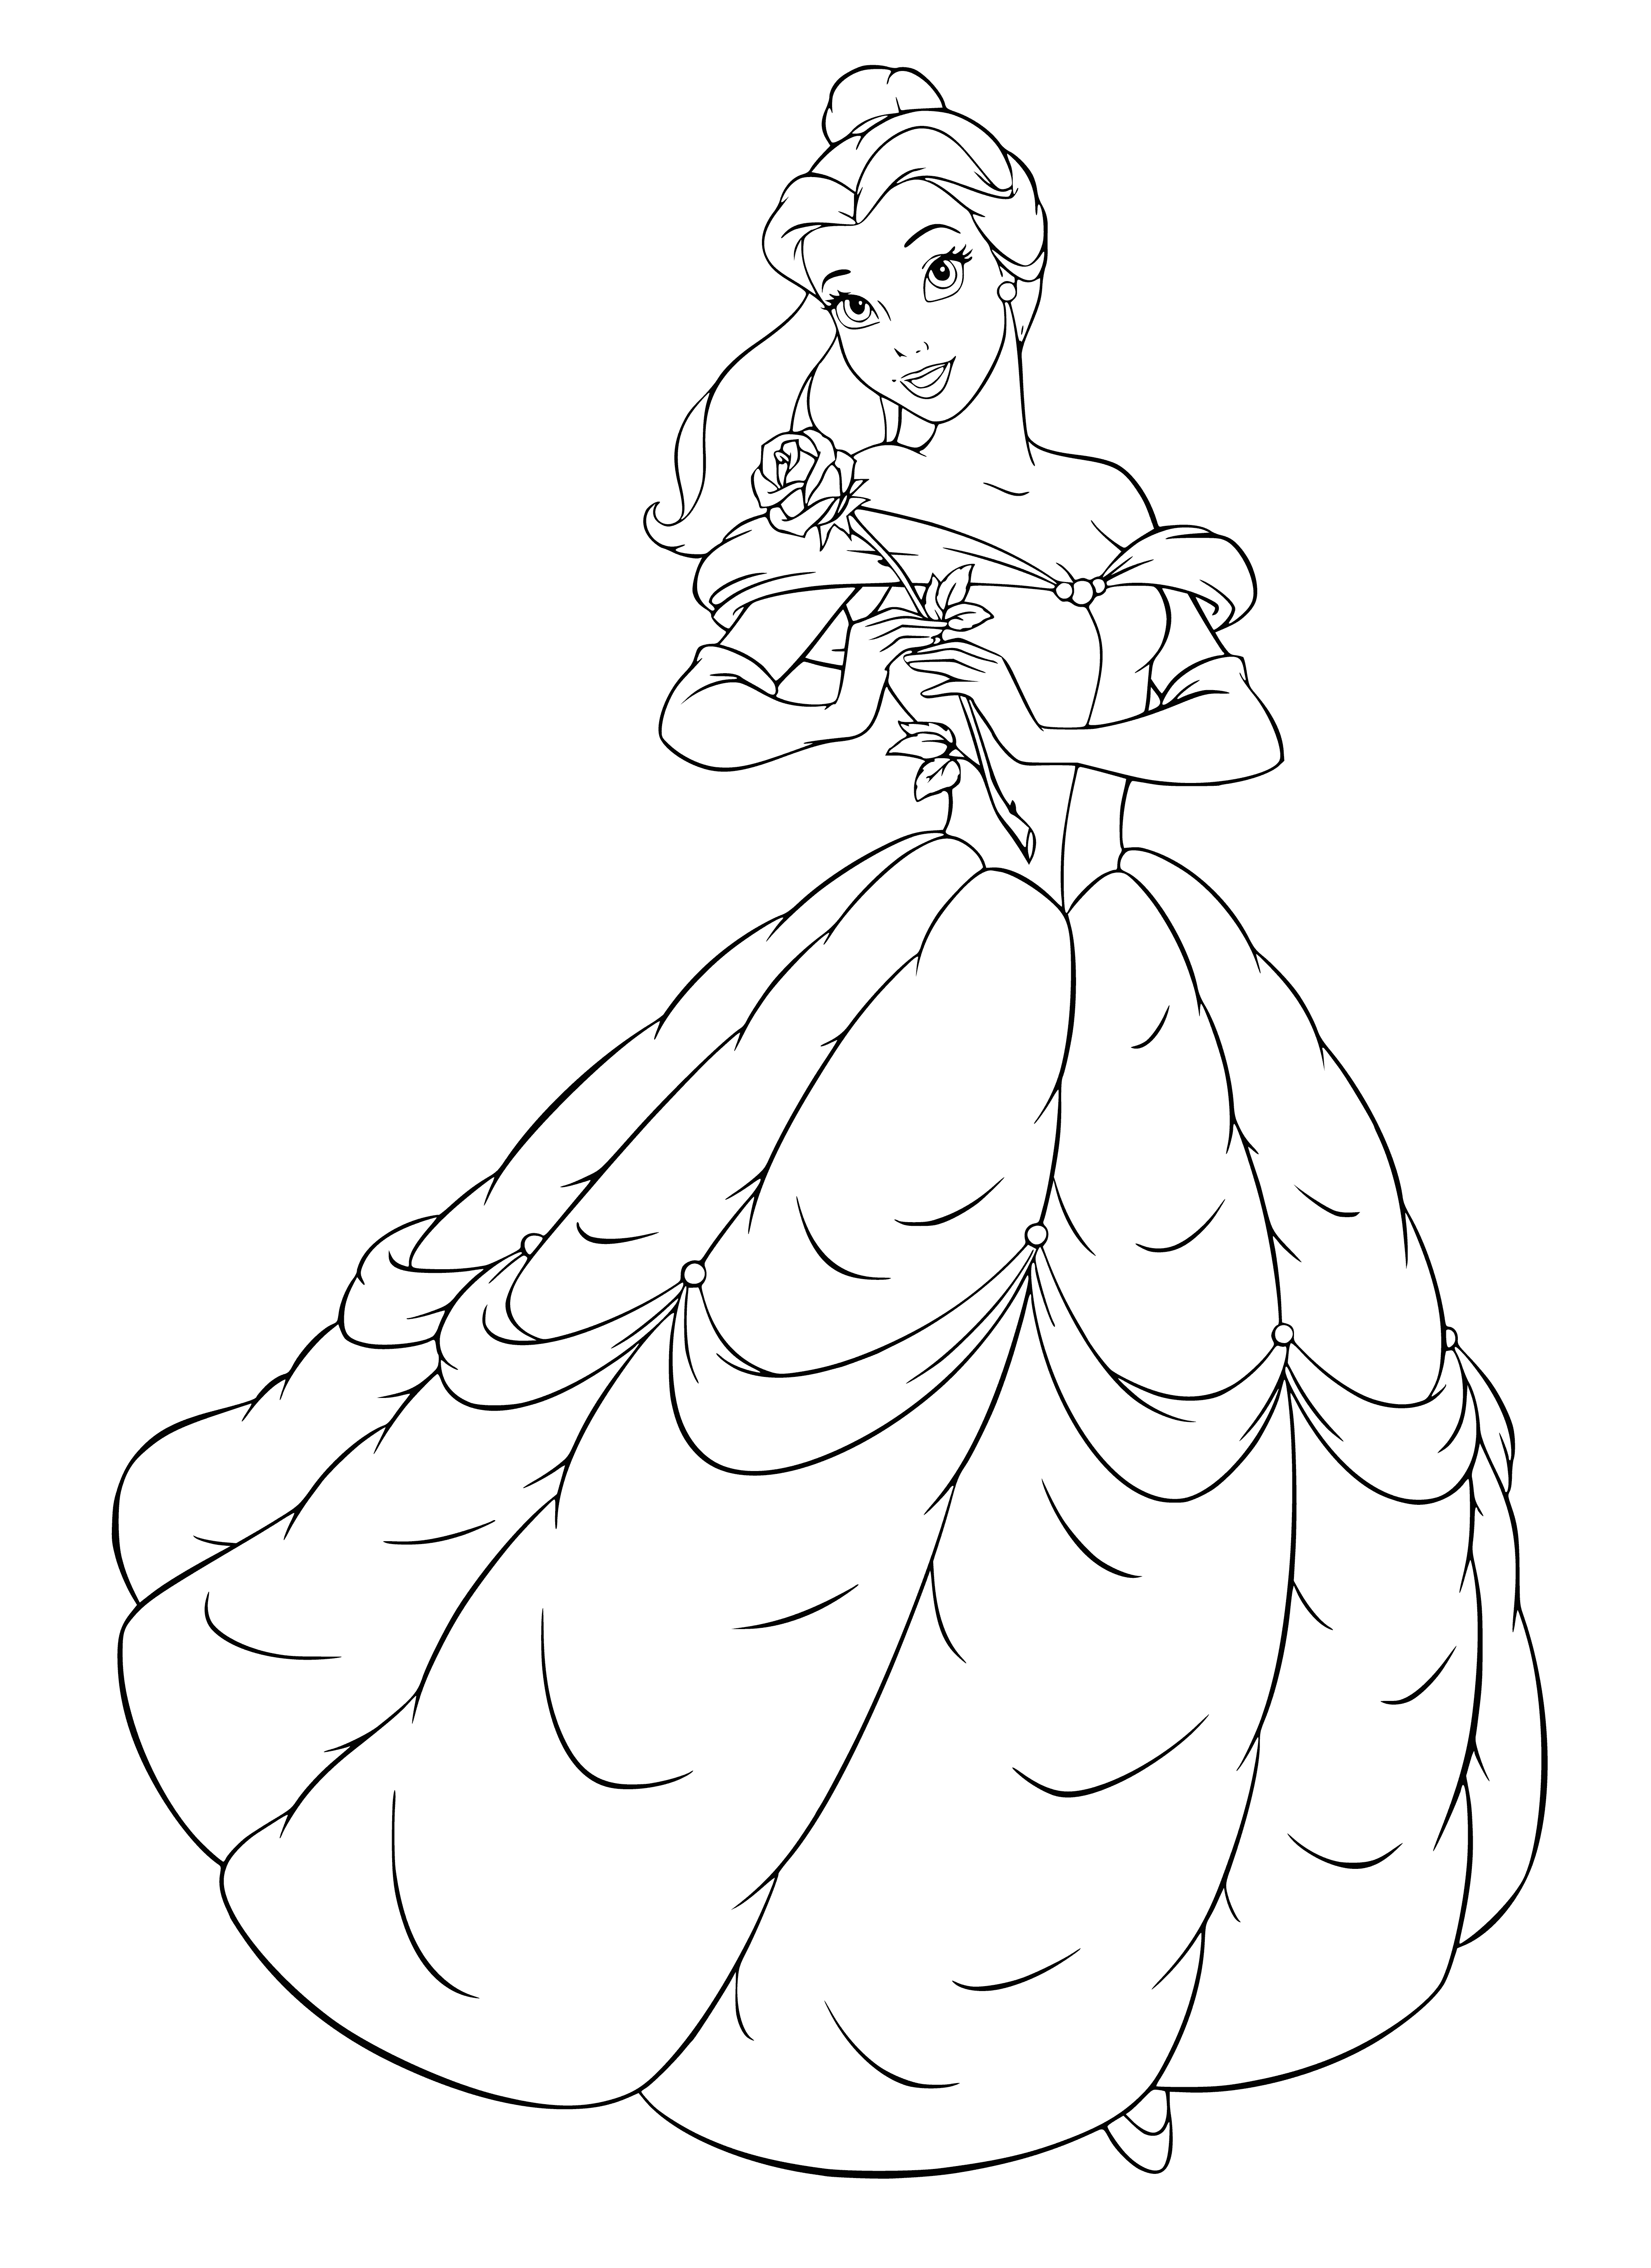 coloring page: Belle stands before a large door, wearing a yellow dress, a white apron and her hair pulled back. She looks apprehensive and rests her hand on the handle.